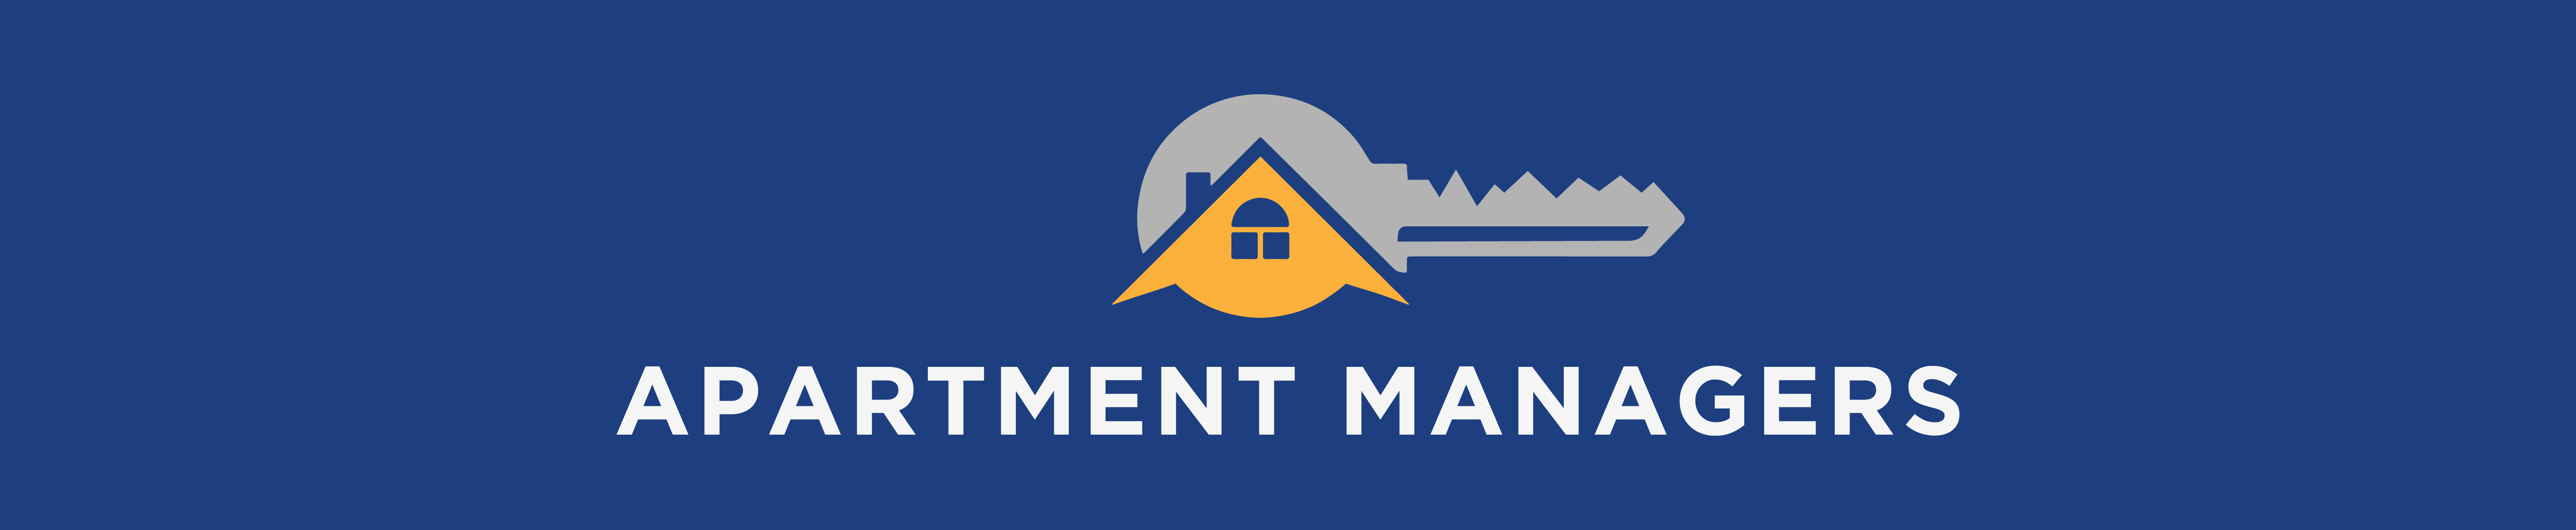 Apartment Managers